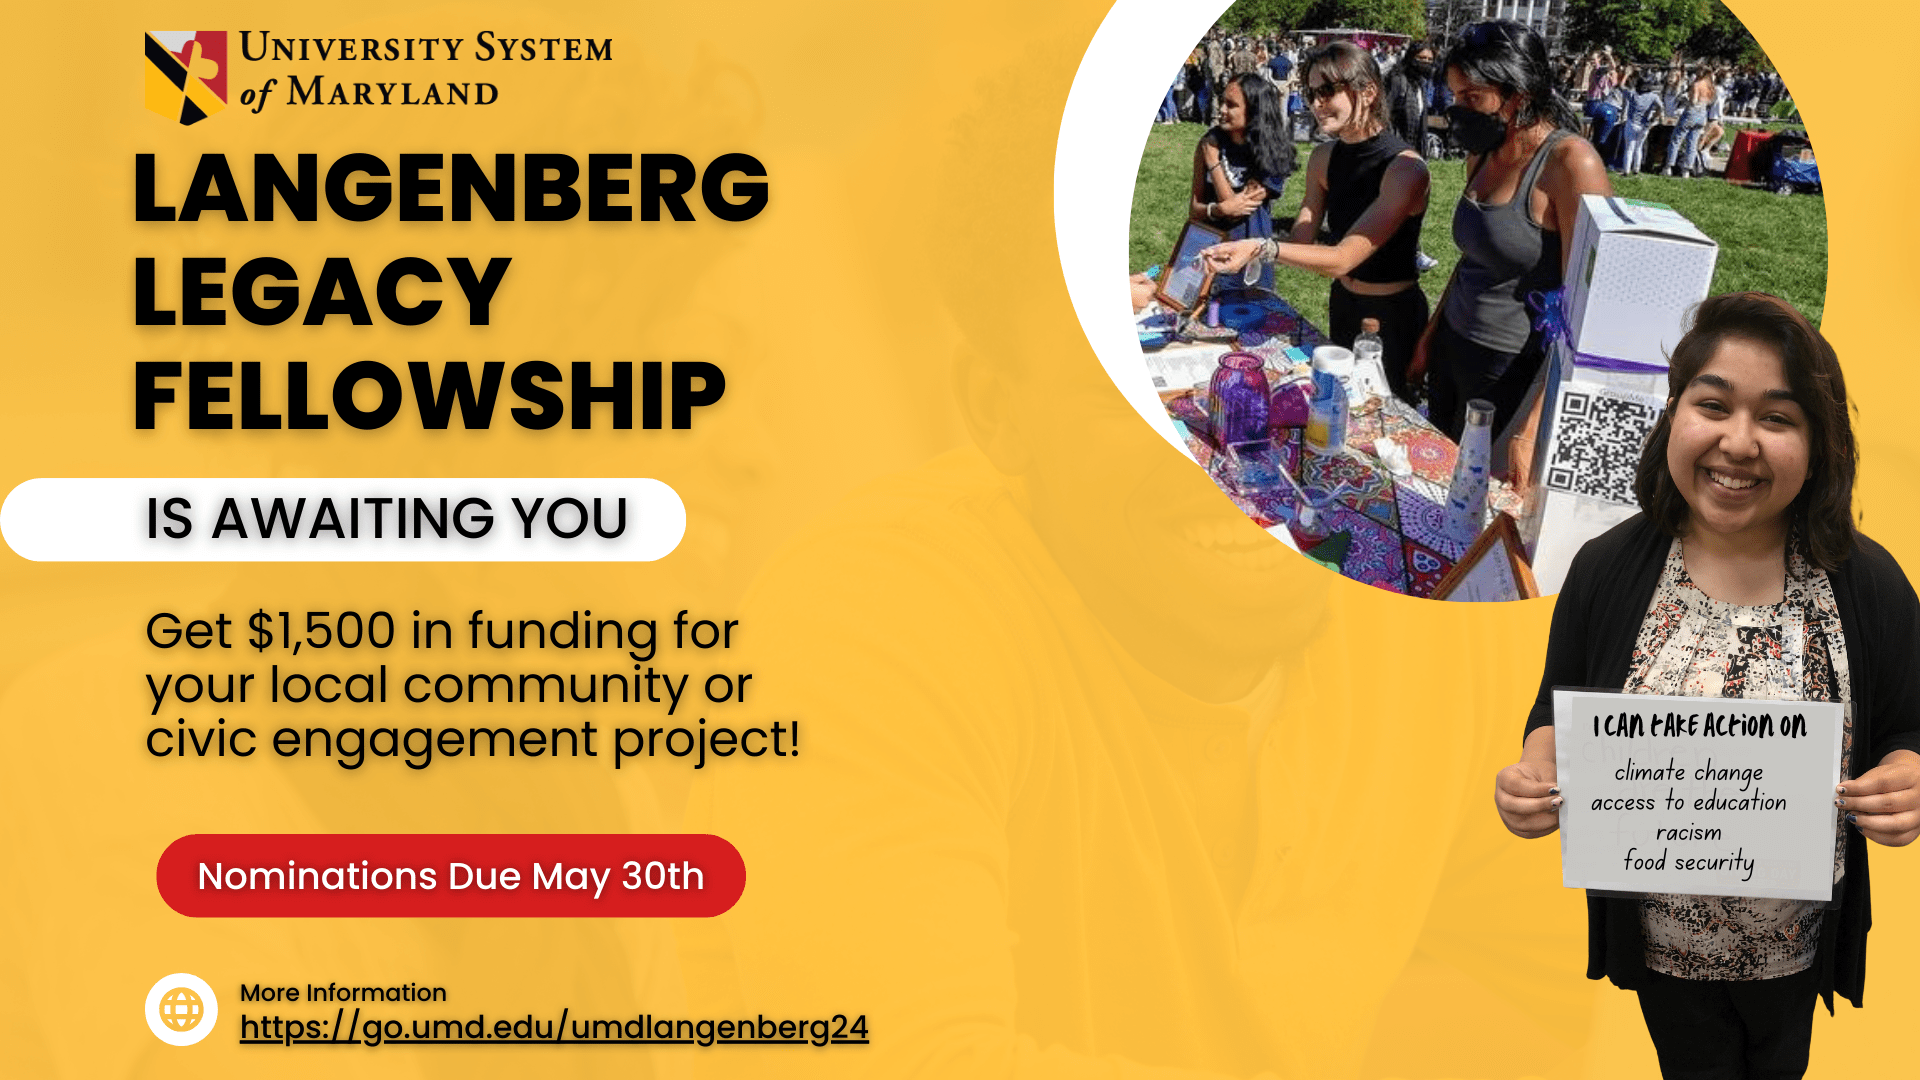 langenberg legacy fellowship announcement sharing May 30th as due date; Get $1500 in funding for your local community engagement project